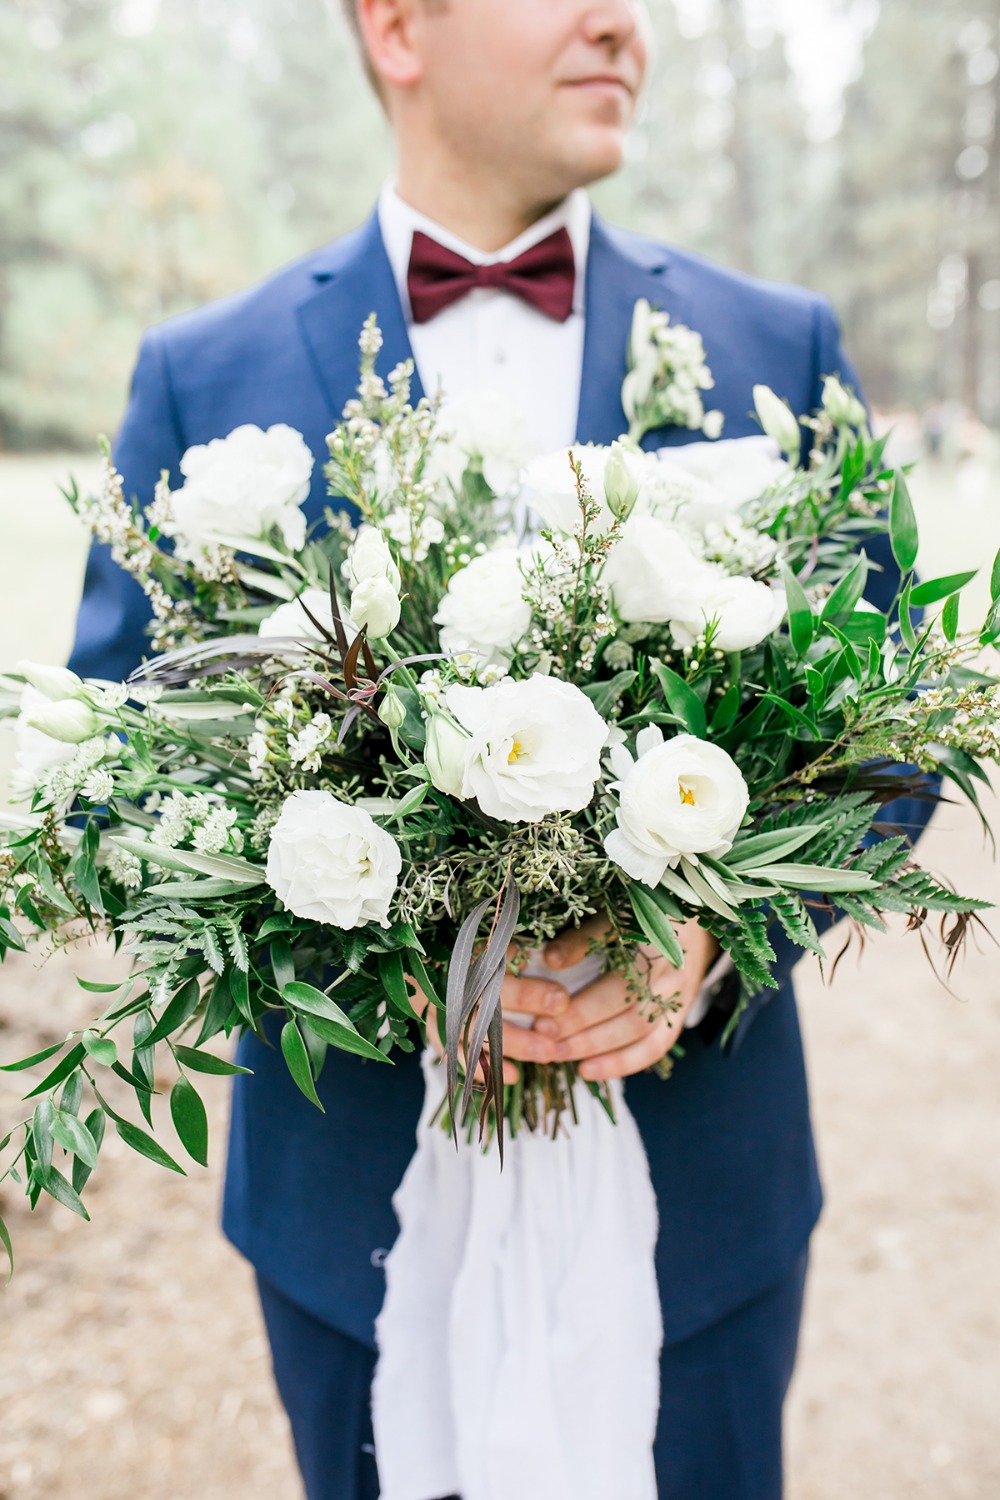 White rose bouquet